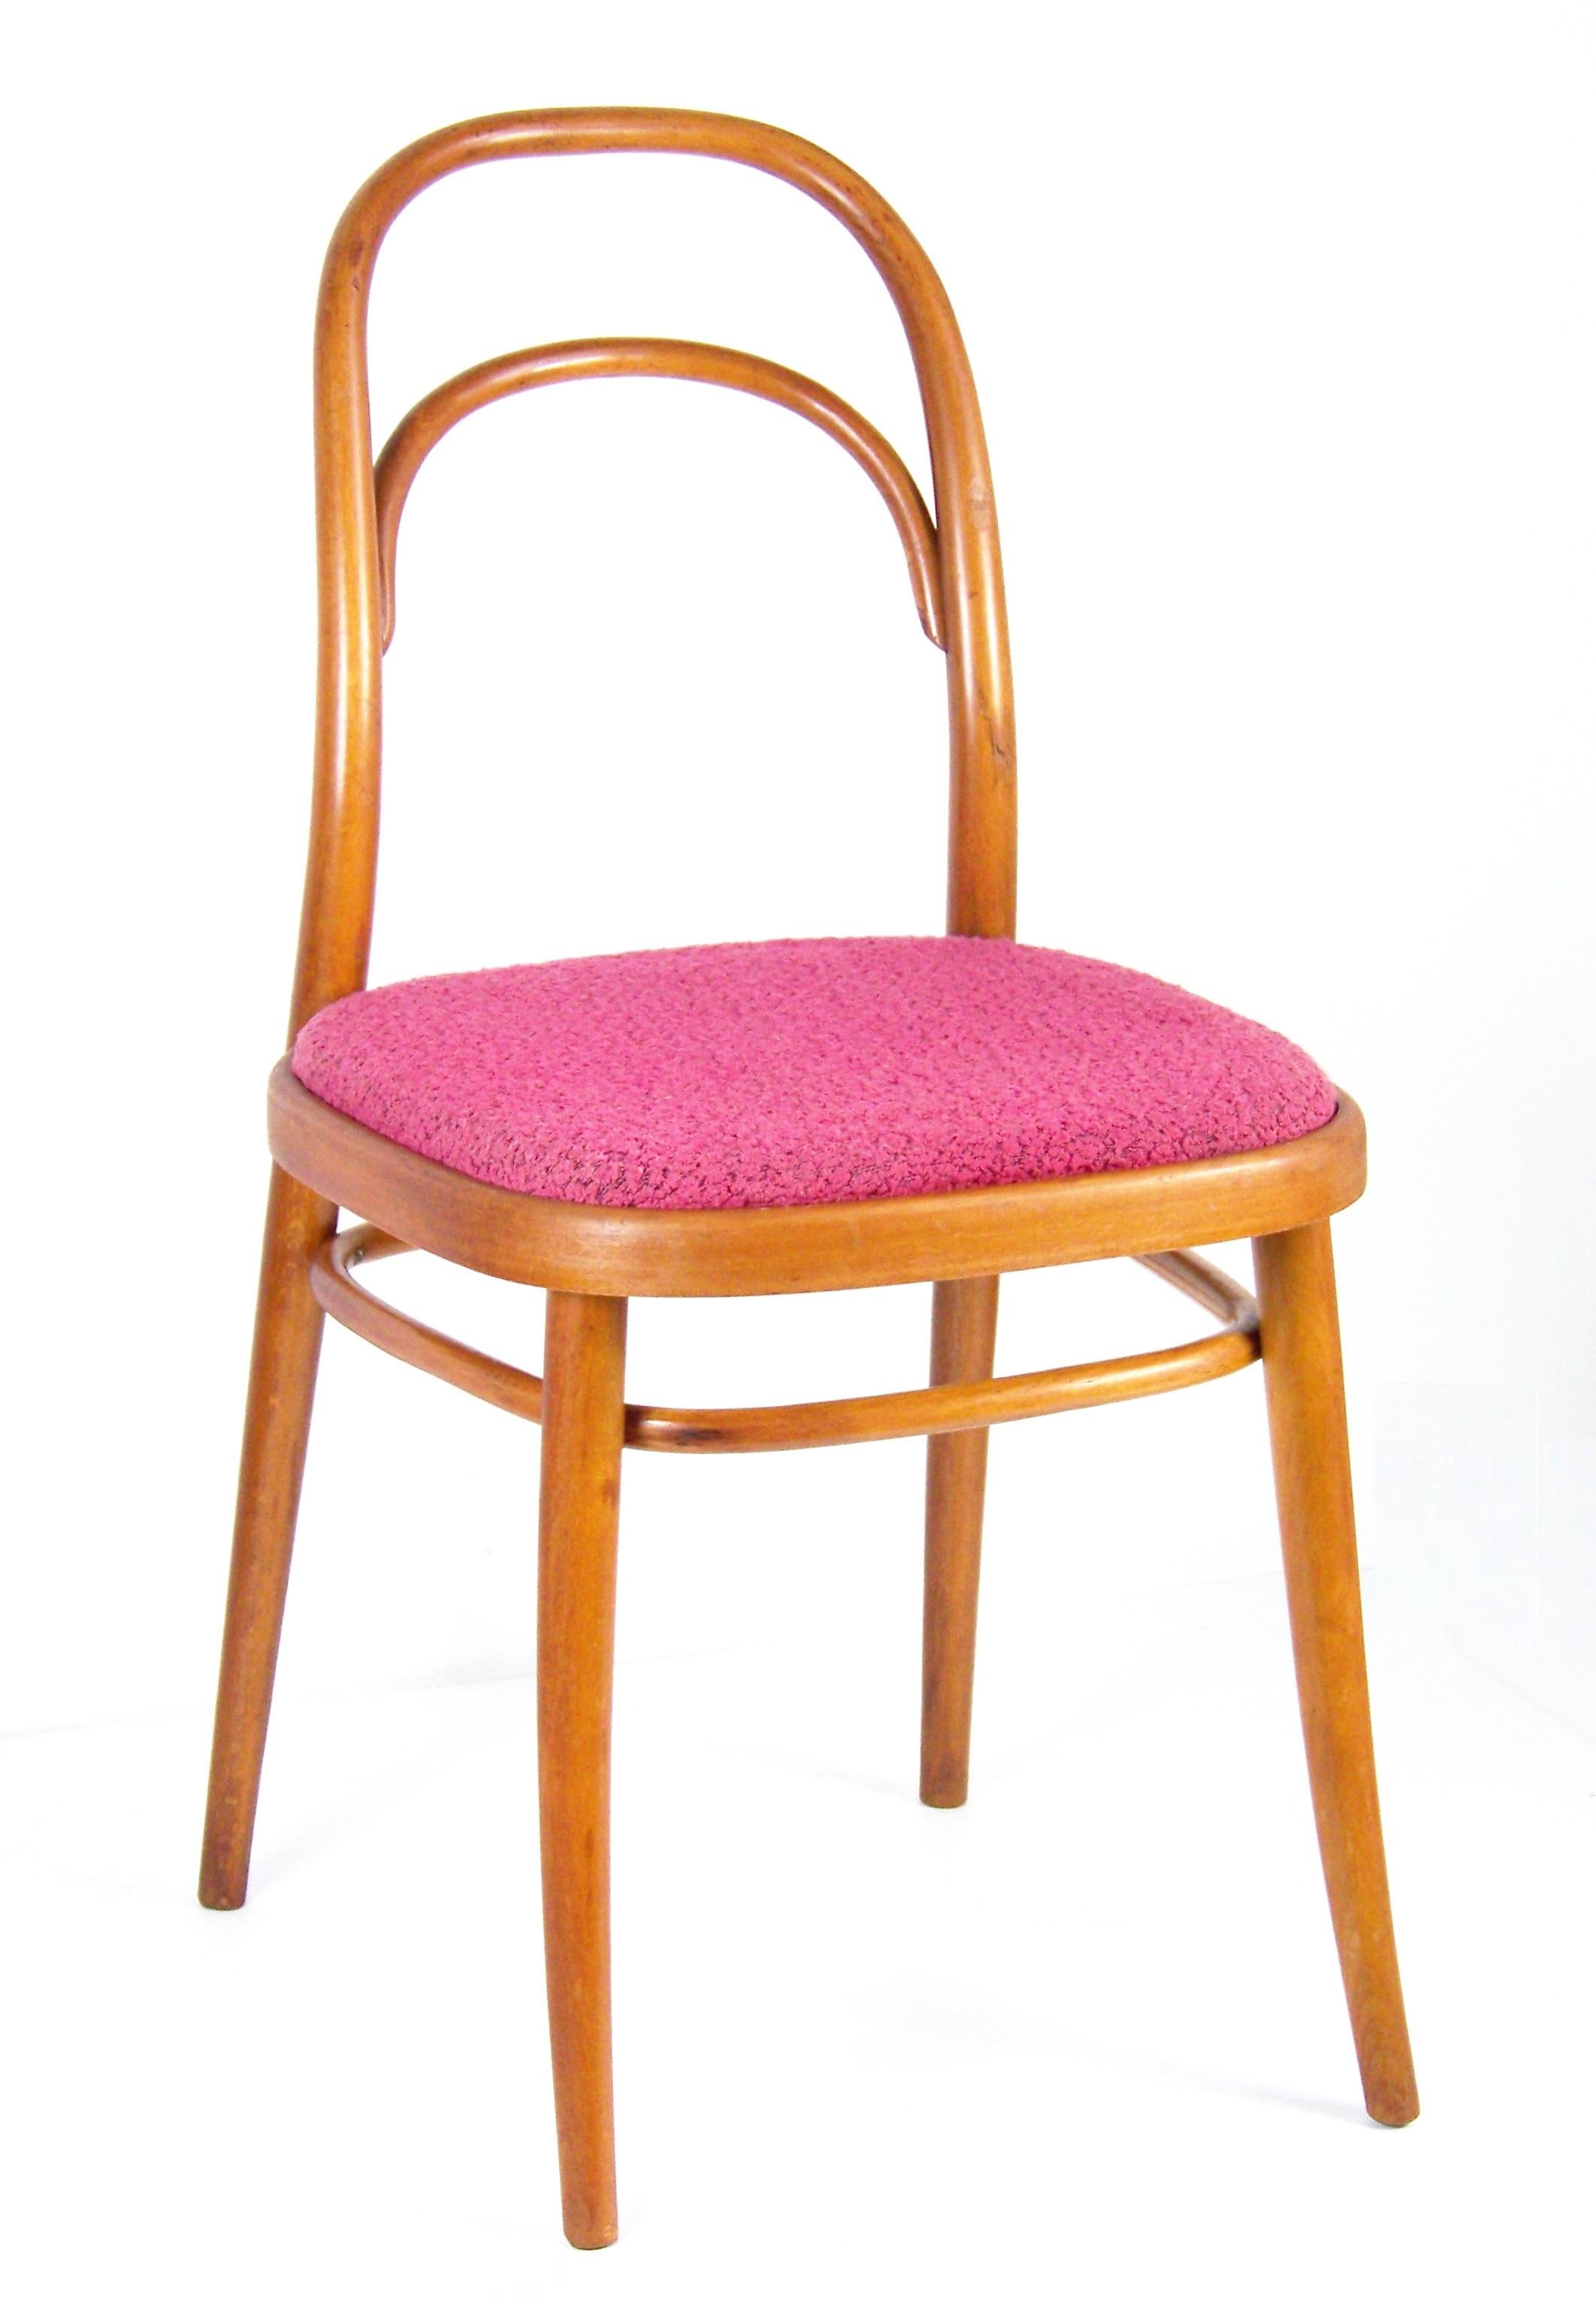 Variant chair no. 1668, designed in 1967 by arch. Antonín Šuman in Czechosovakia. The chair won important design competitions in its time. In contrast to chair No. 1668 to export abroad, chair No. 1667 was sold only to the domestic market. Good